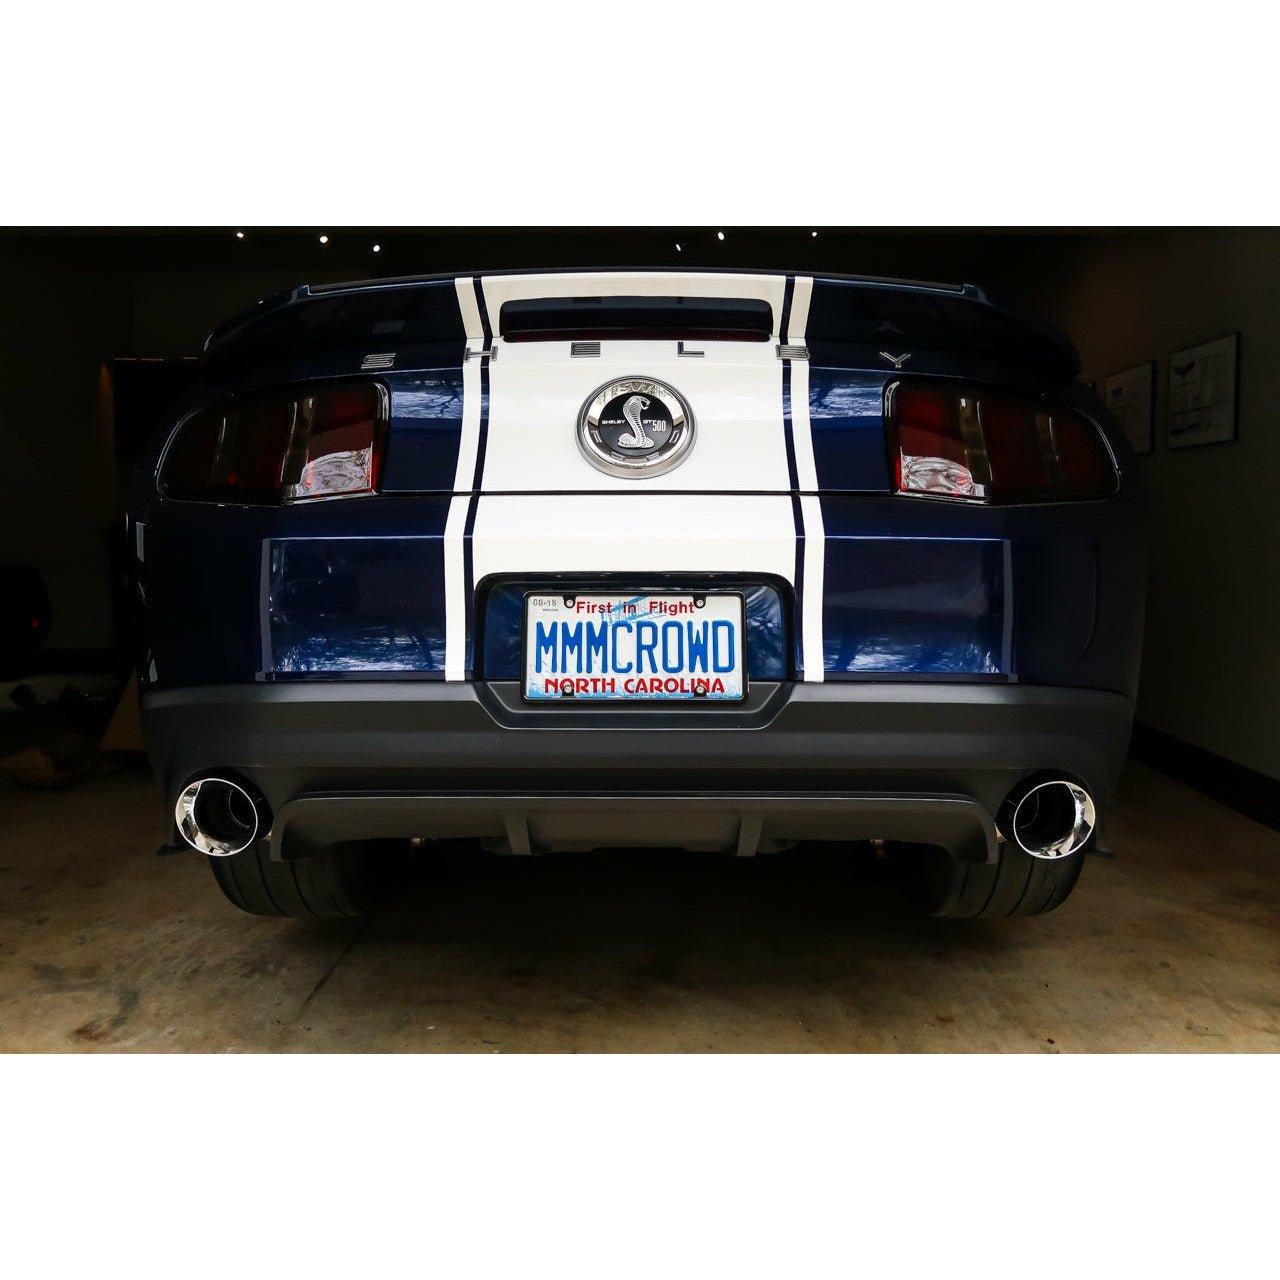 2011-2014 Mustang GT | AWE Touring Edition Axle-Back Exhaust with Chrome Silver Tips - Truck Accessories Guy